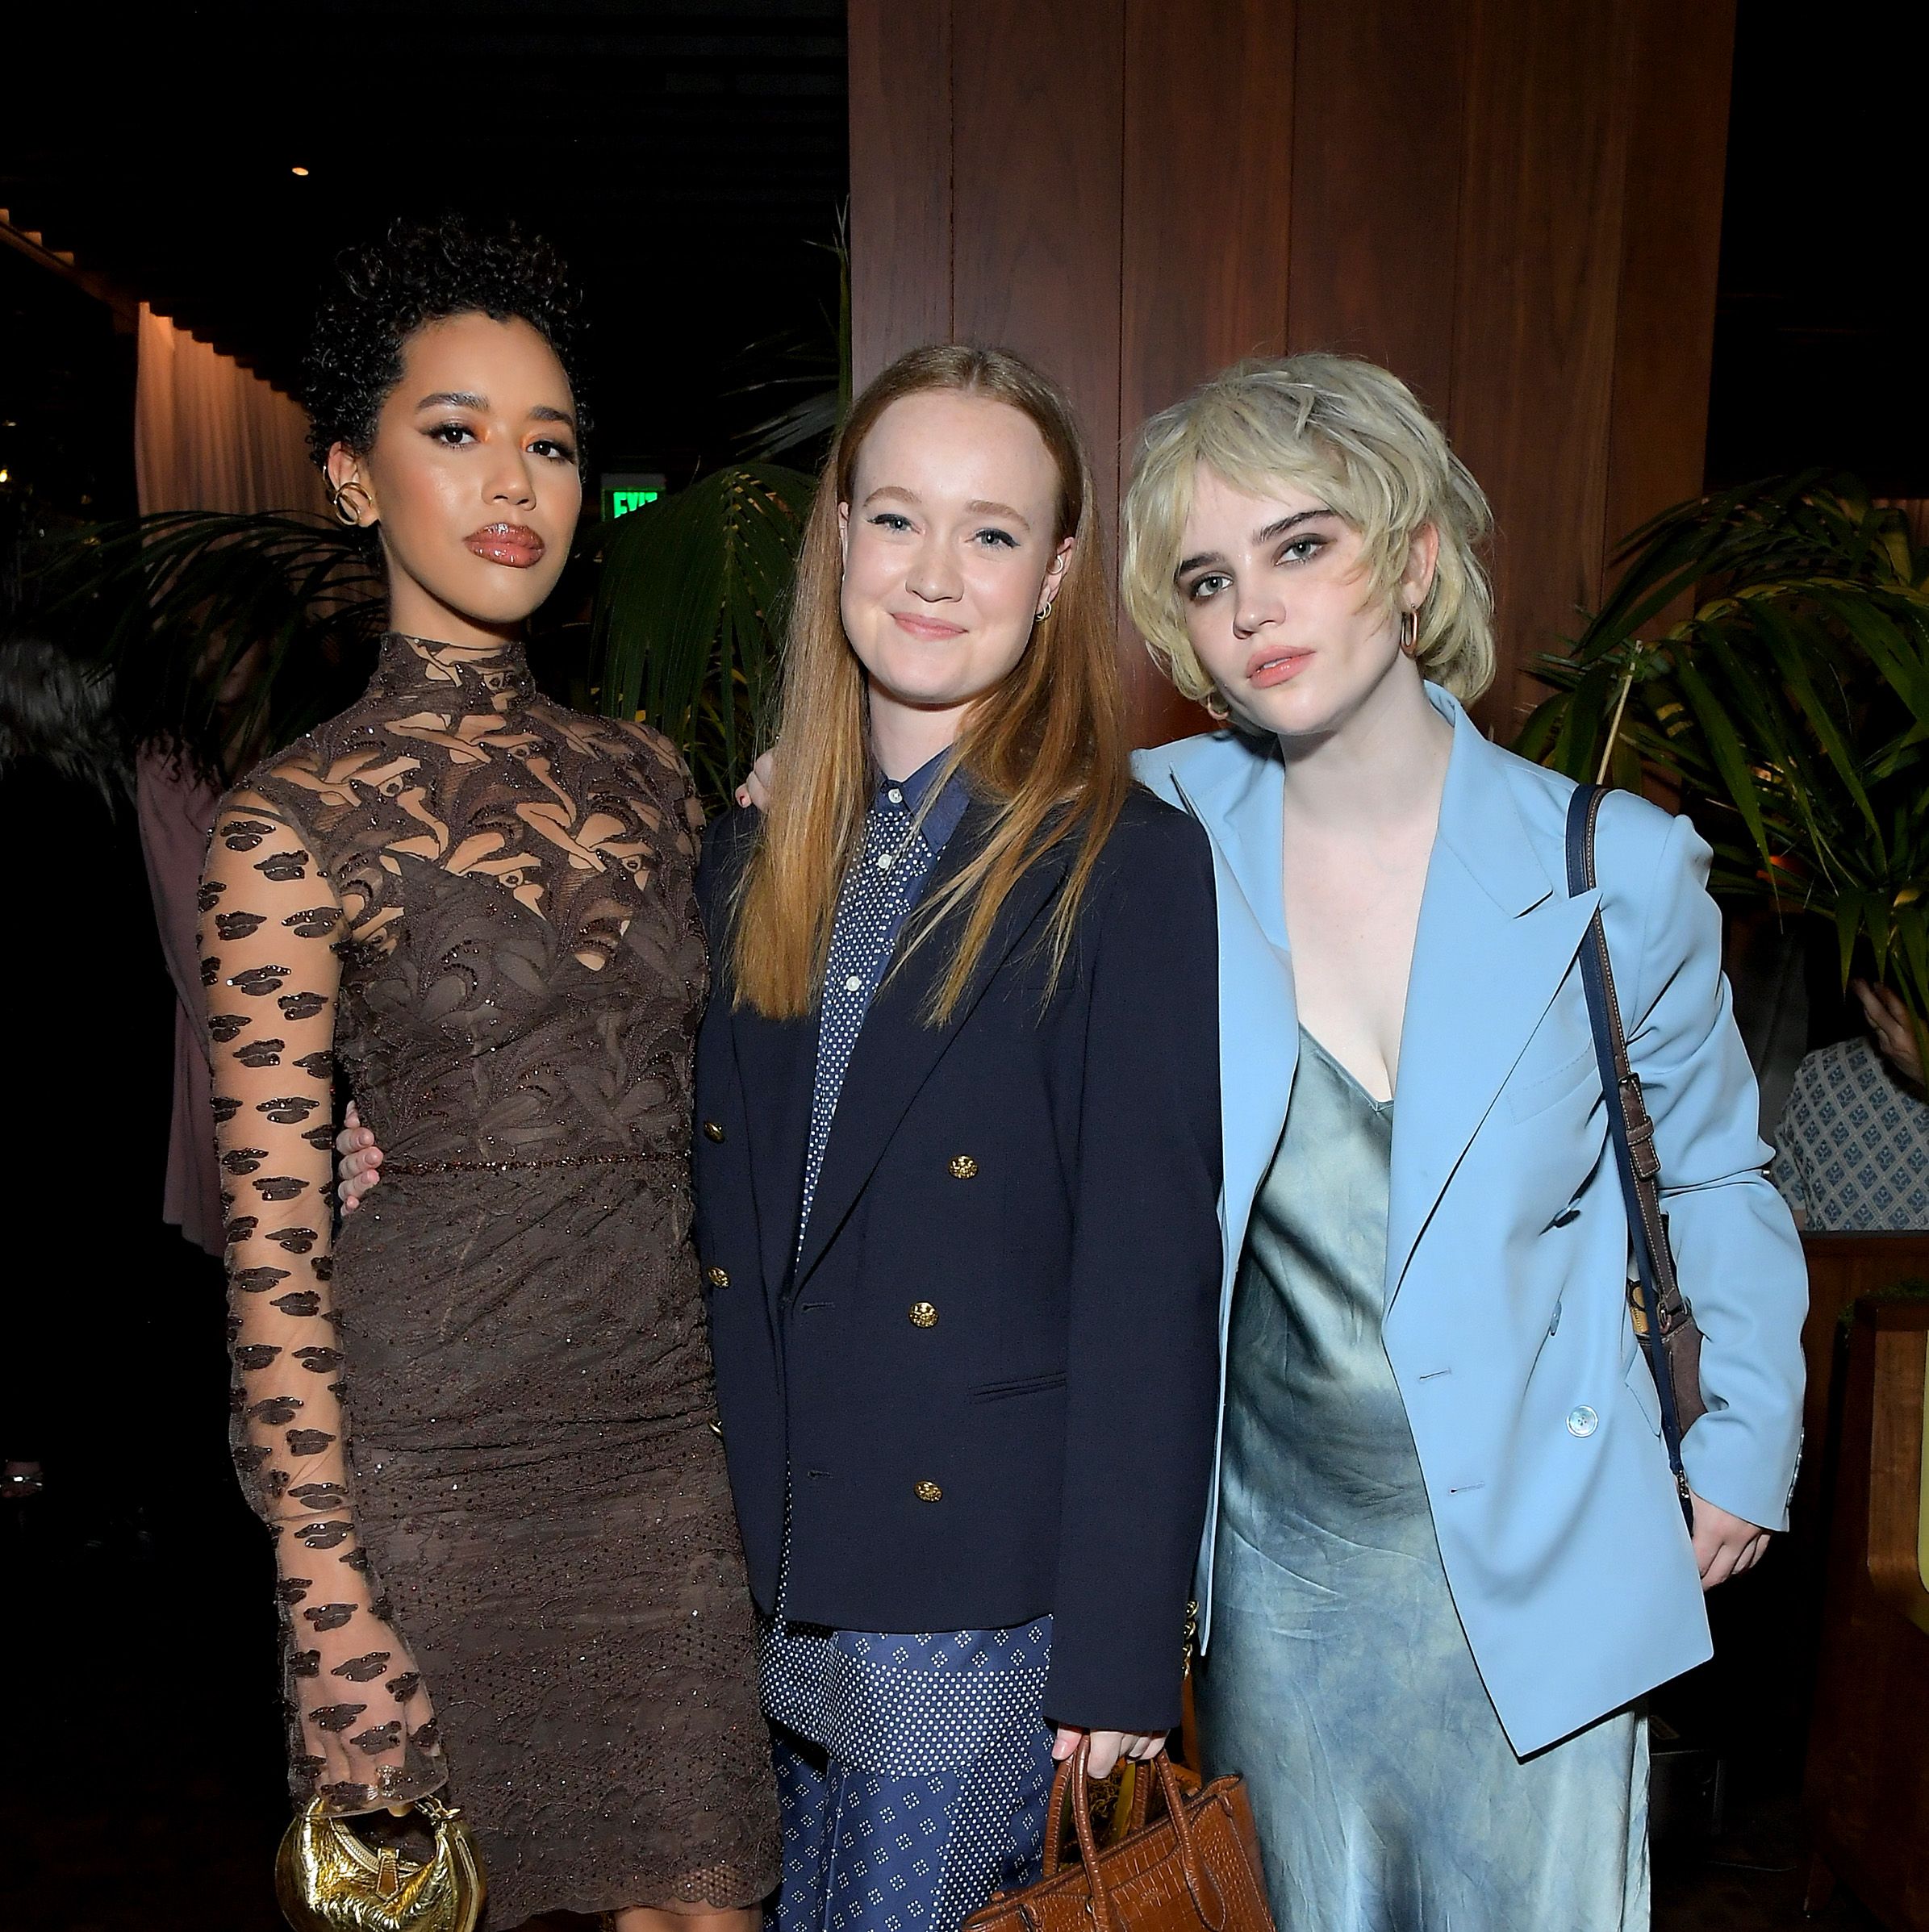 Stars Jasmin Savoy Brown, Liv Hewson, and Sophie Thatcher came together for the glamorous evening.